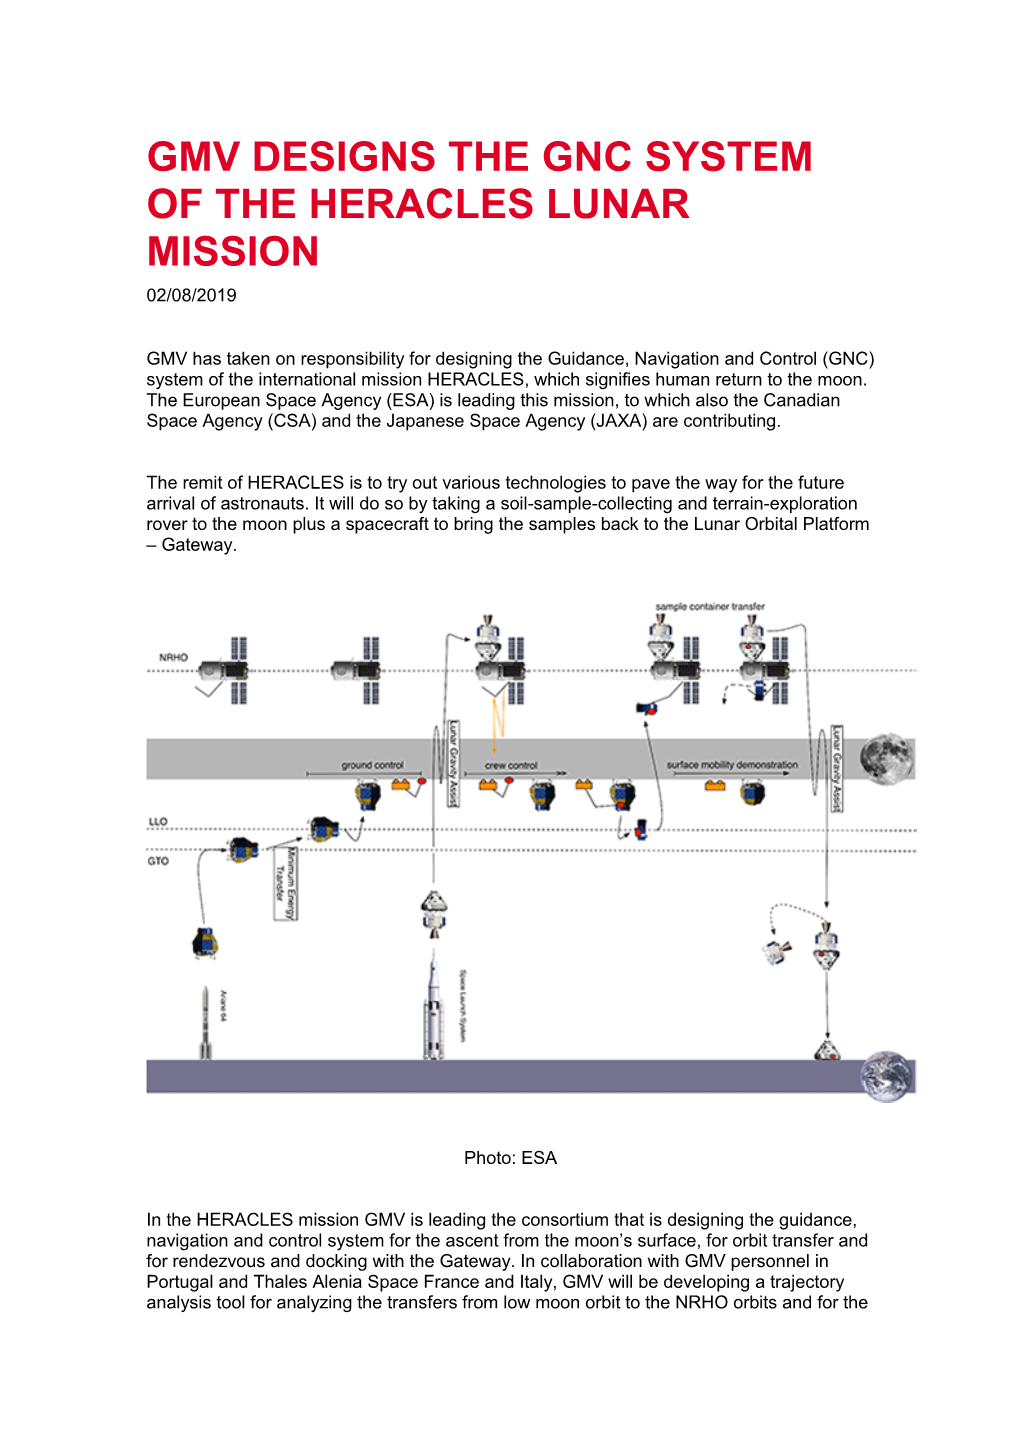 Gmv Designs the Gnc System of the Heracles Lunar Mission 02/08/2019